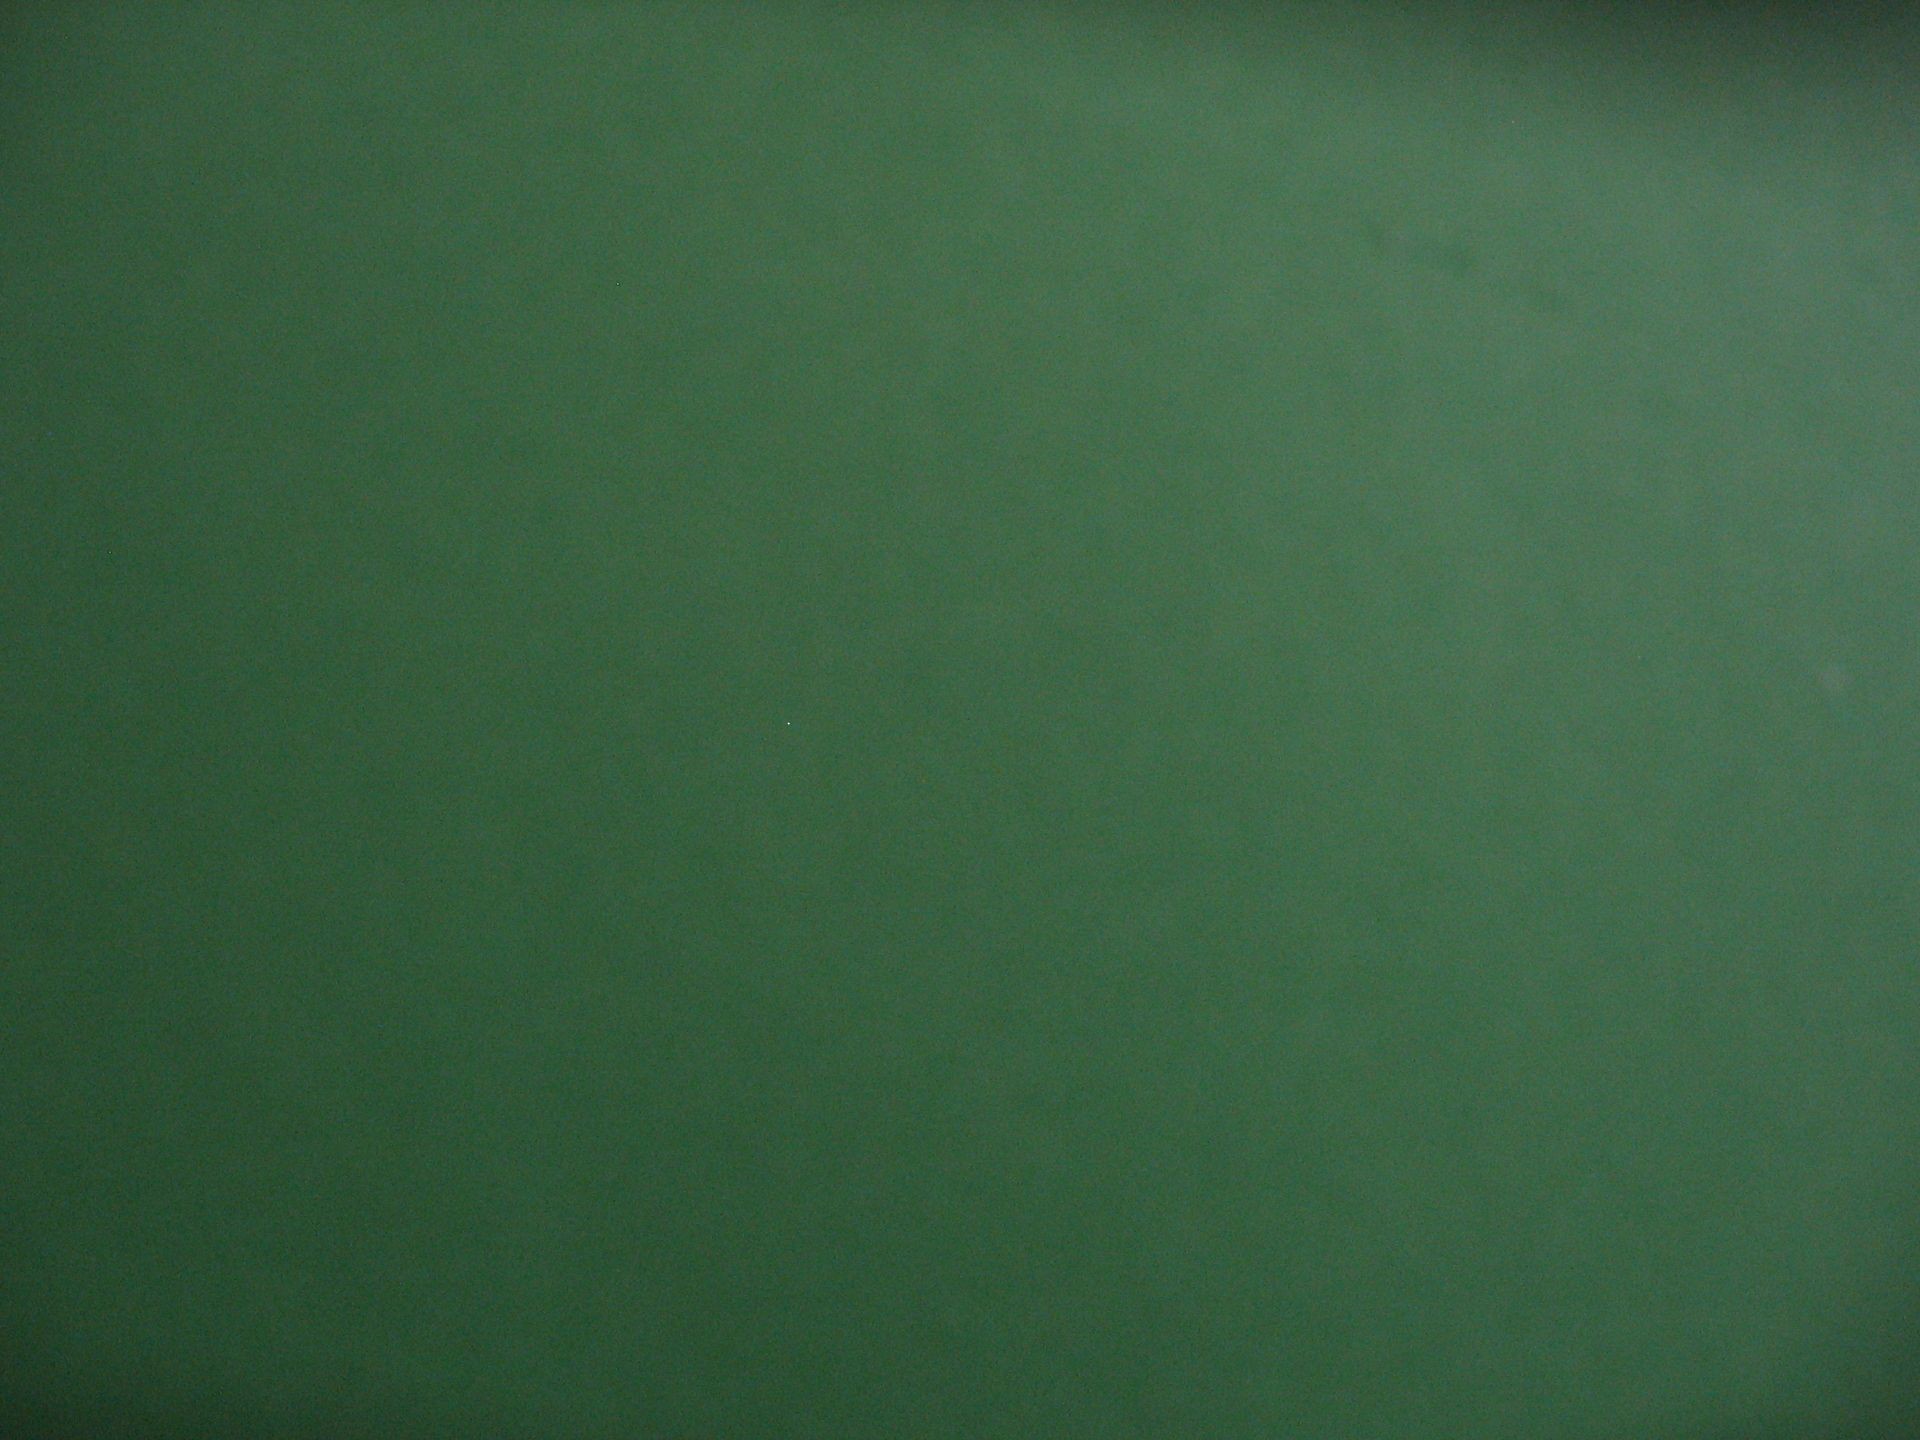 background green paper free photo